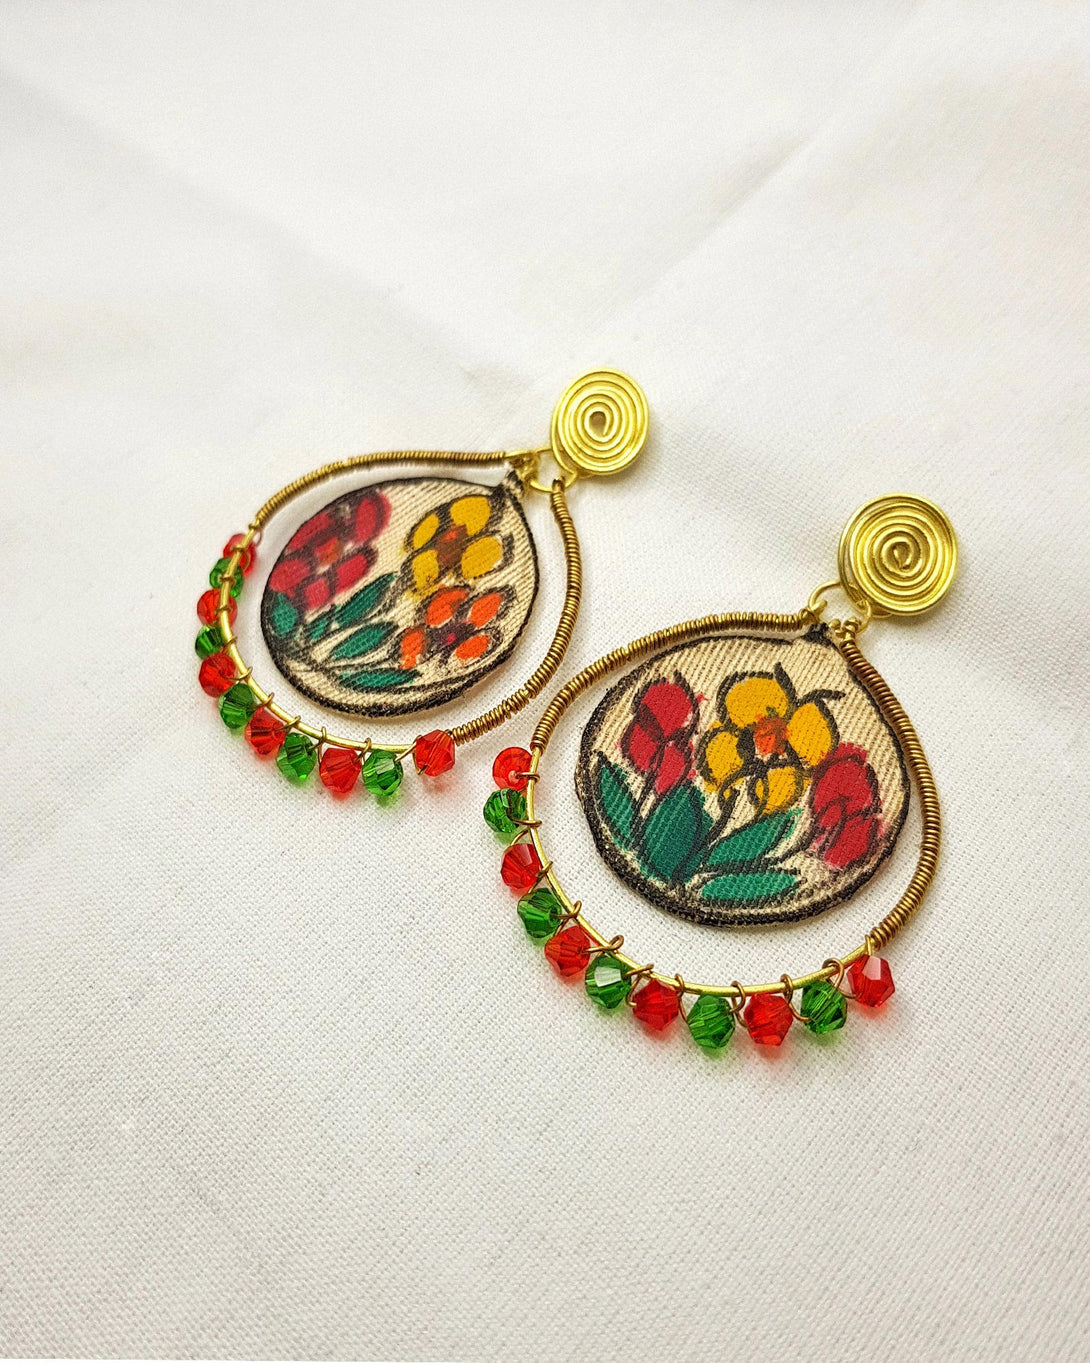 Mithila tales Phul Upcycled Handmade Earrings2 from our zero waste store